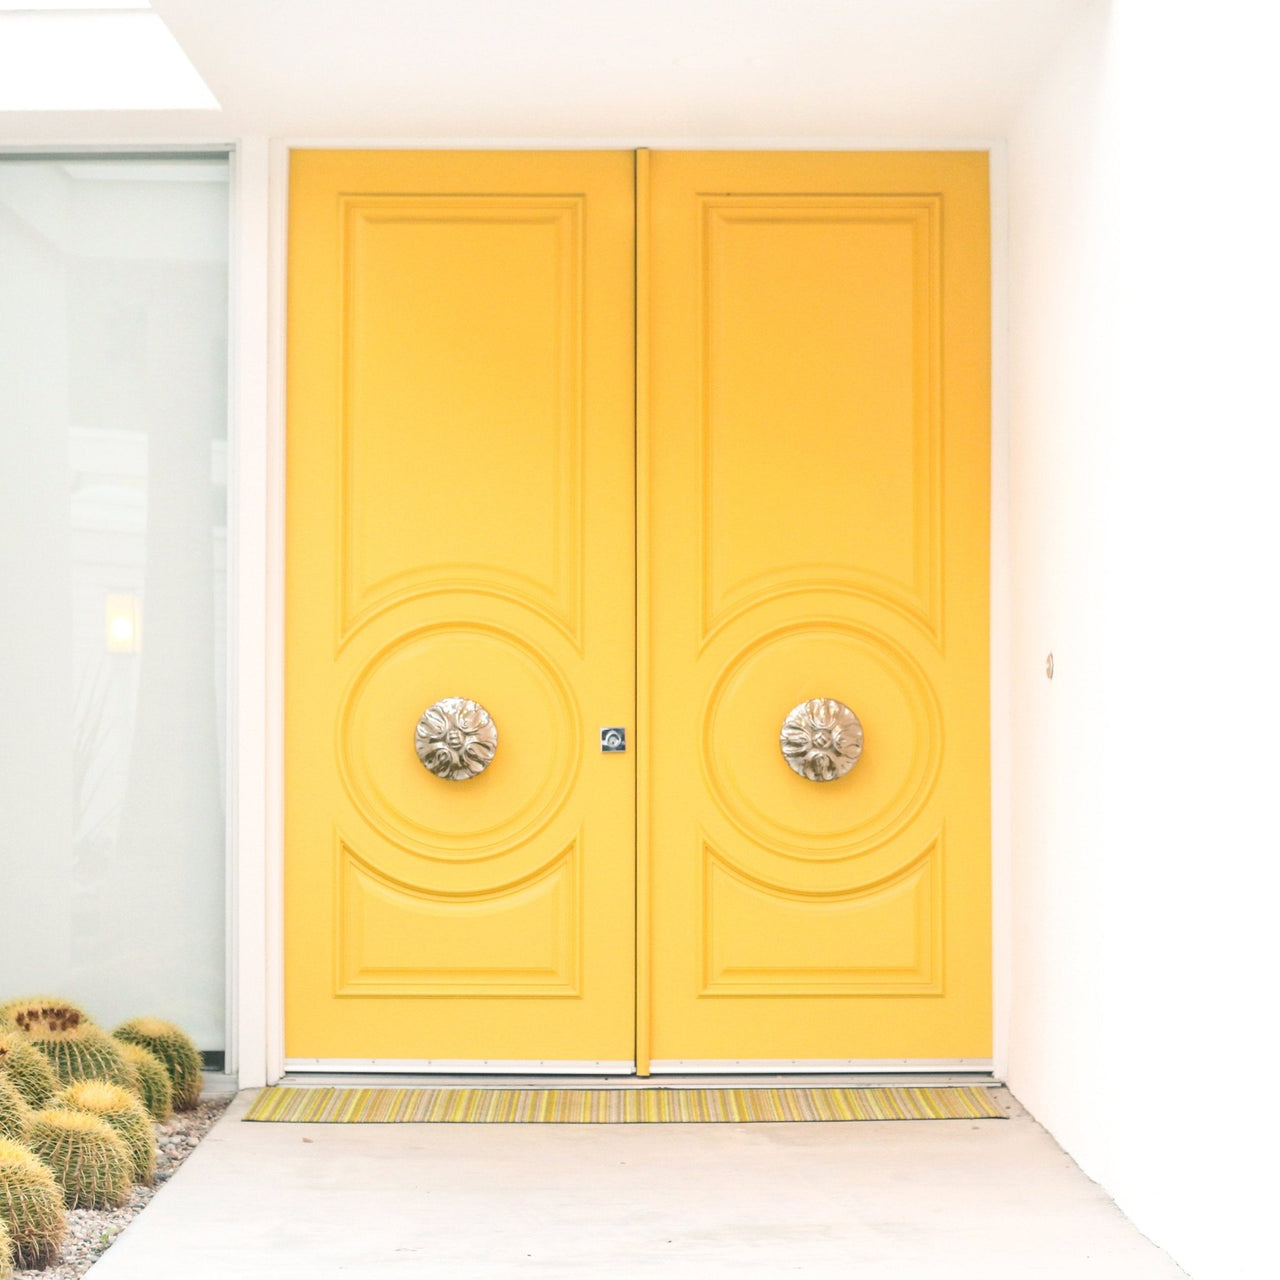 Doors of Palm Springs Photograph by Kelly Segré - Yellow Door of Palm ...